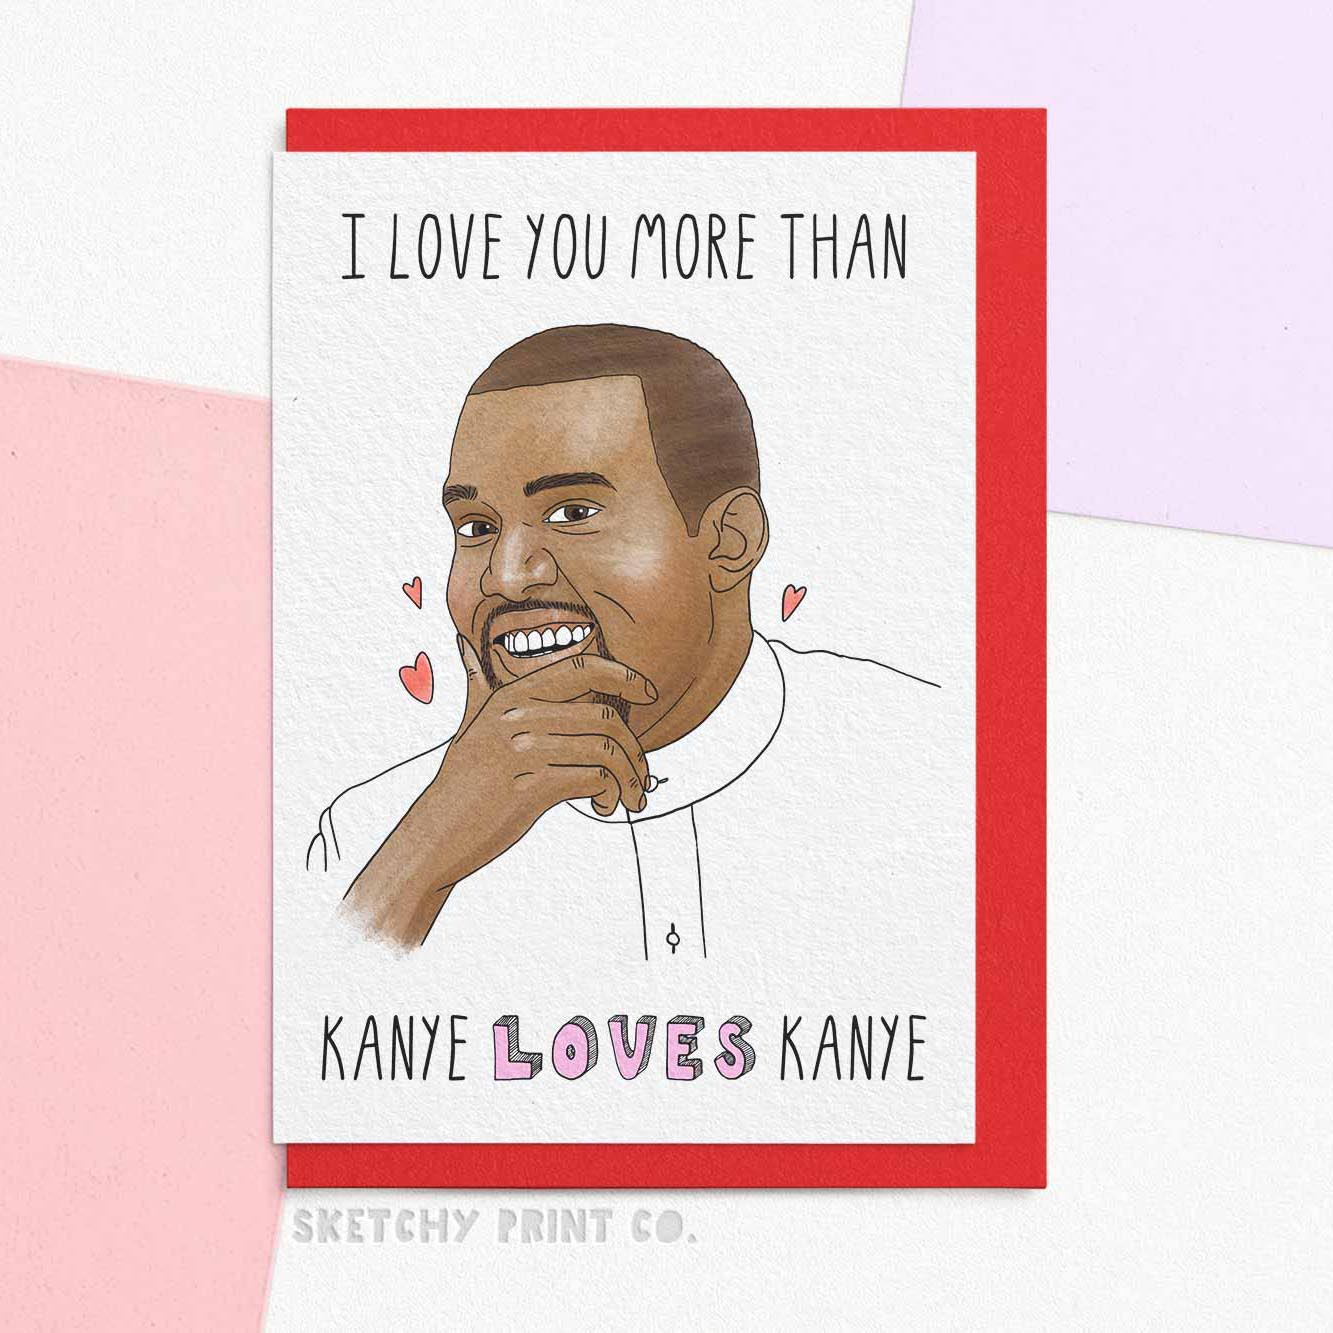 Kanye Funny Rude Silly Valentine’s Day Cards boyfriend girlfriend unique gift unusual hilarious illustrated sketchy print co